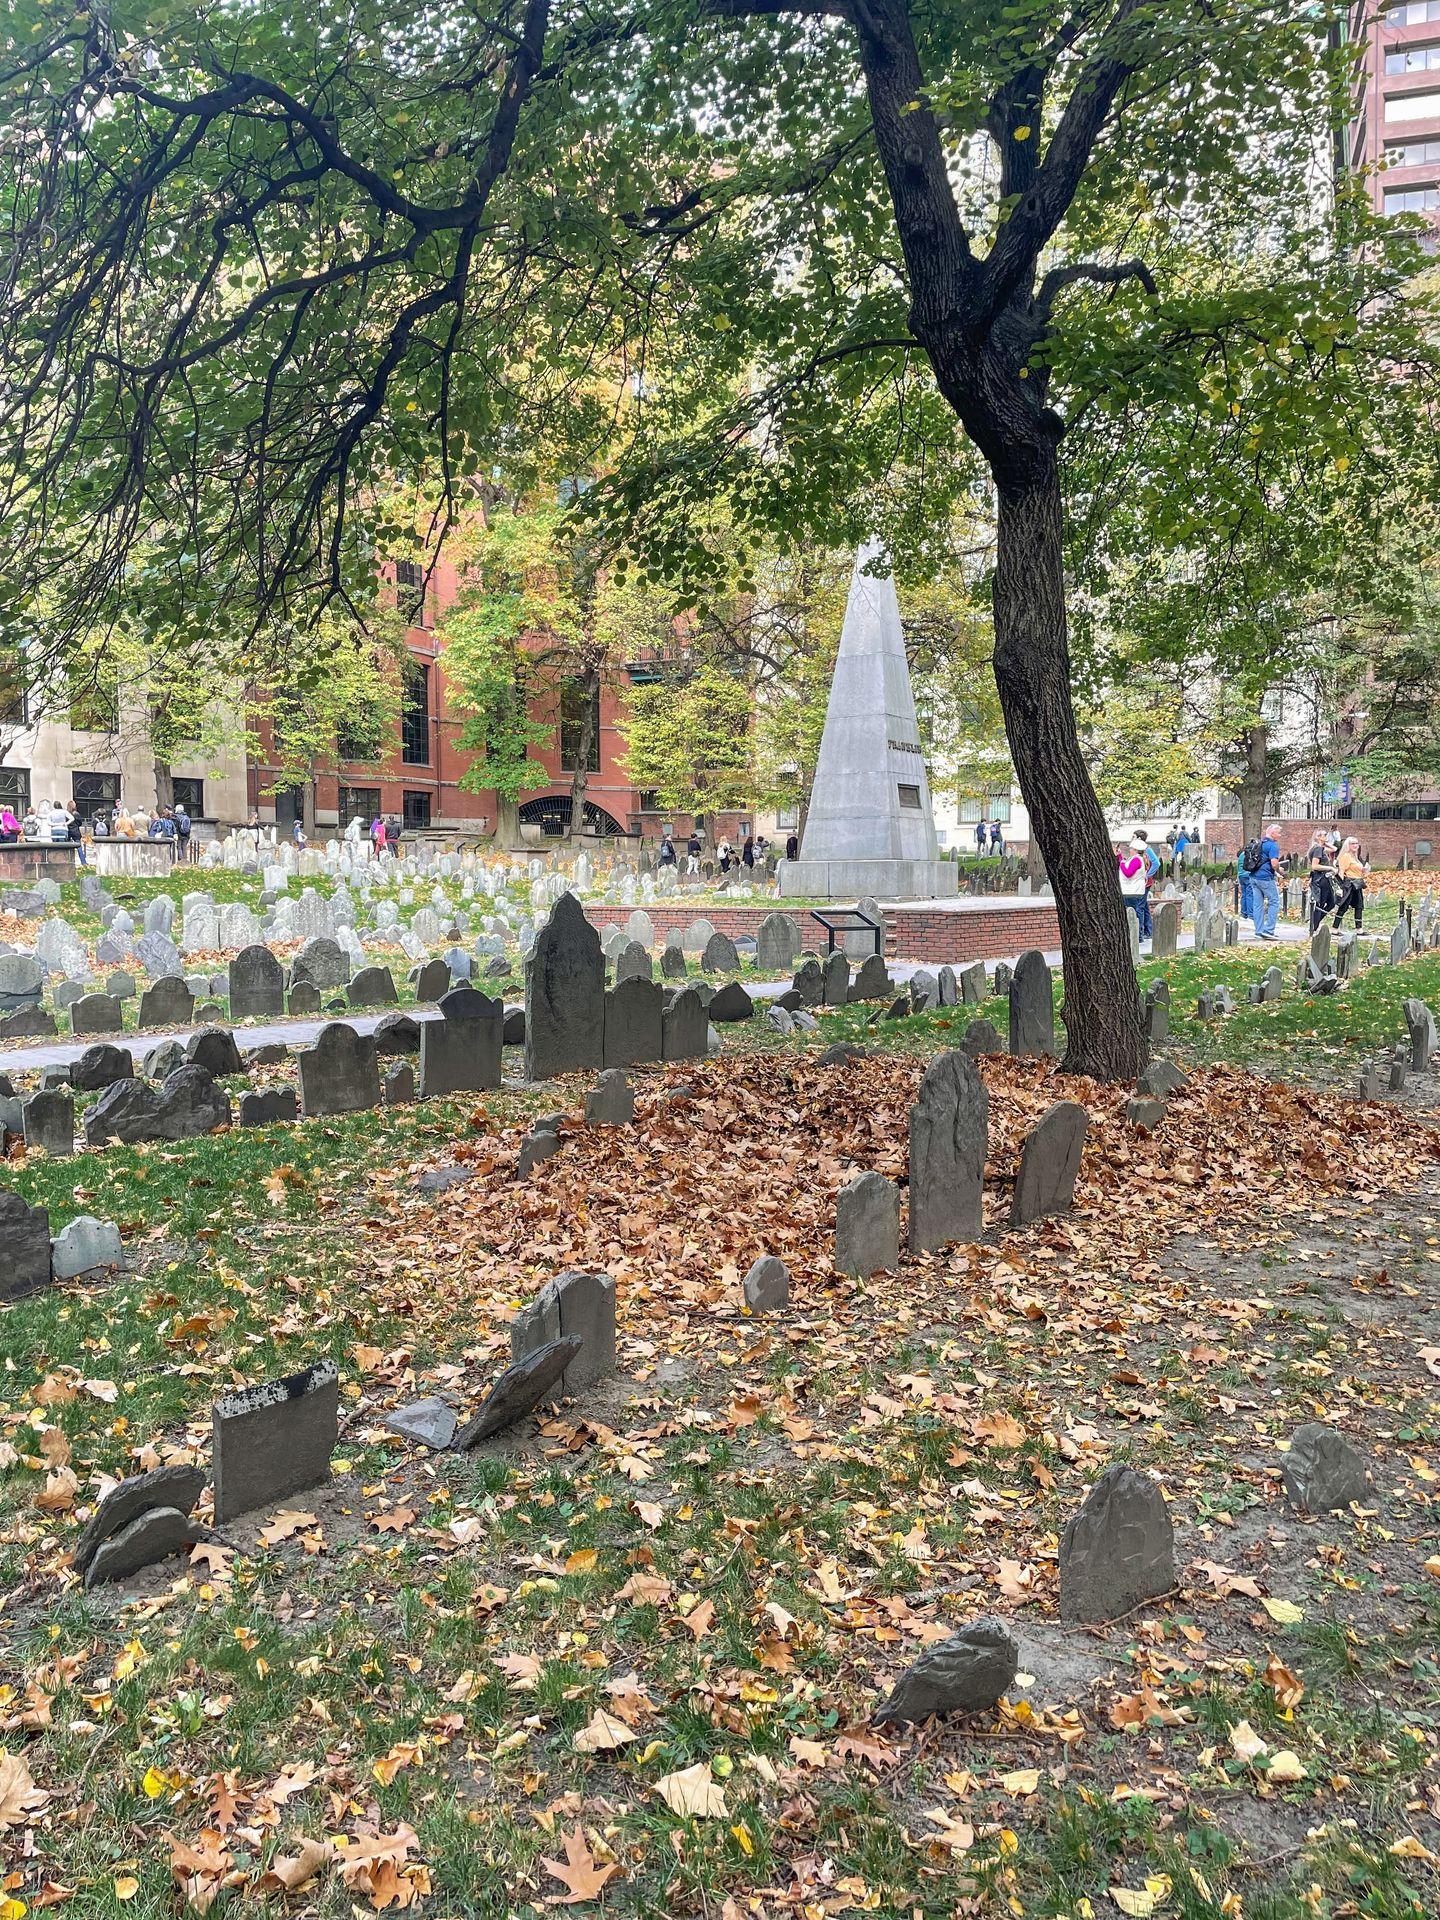 An historic cemetery with small, stone gravestones surrounded by fallen leaves.